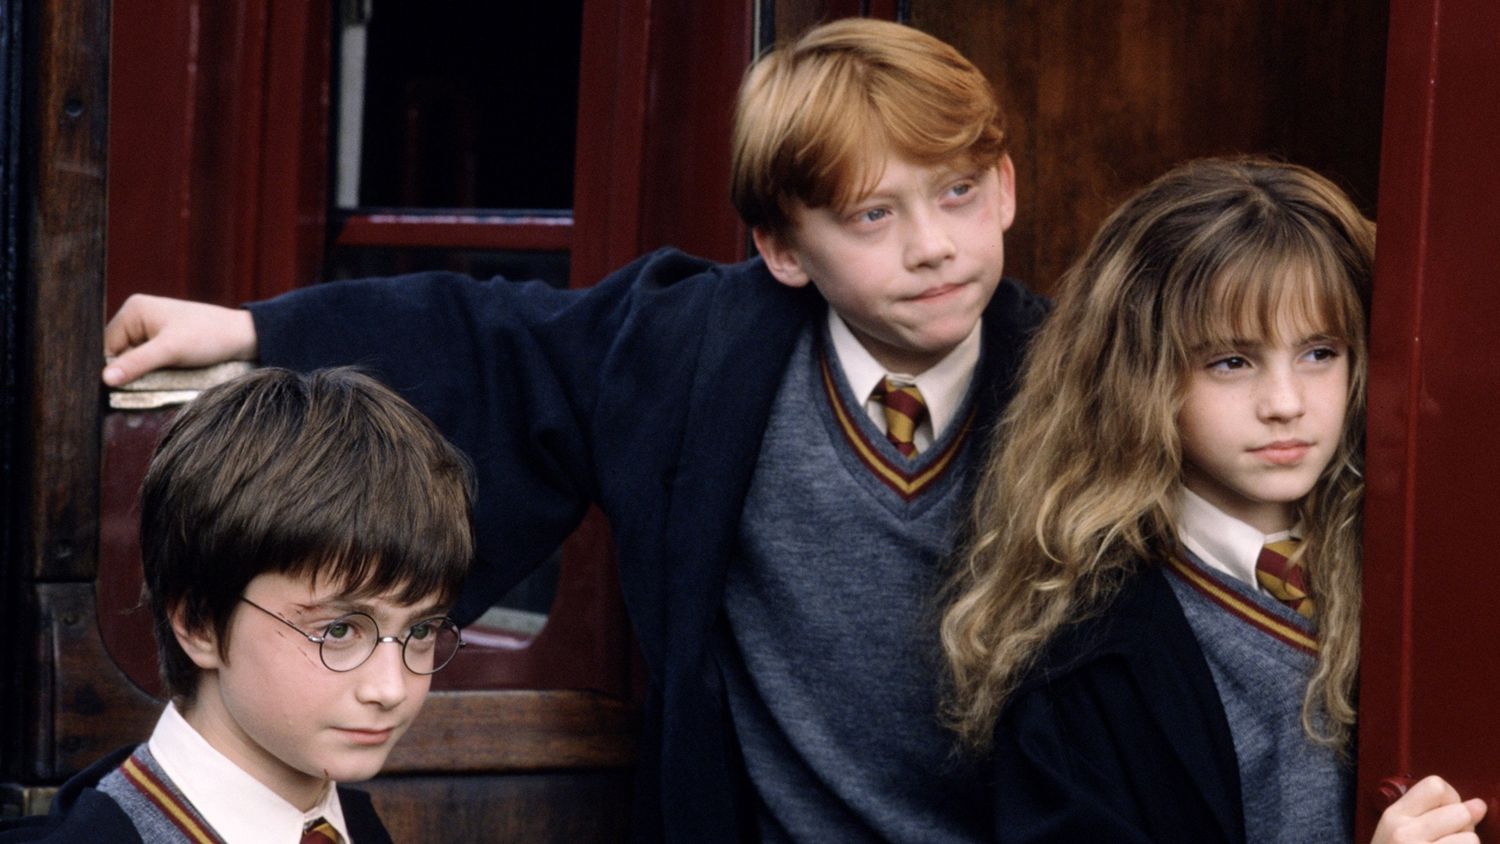 Harry Potter fans DIVIDED over news of potential TV show